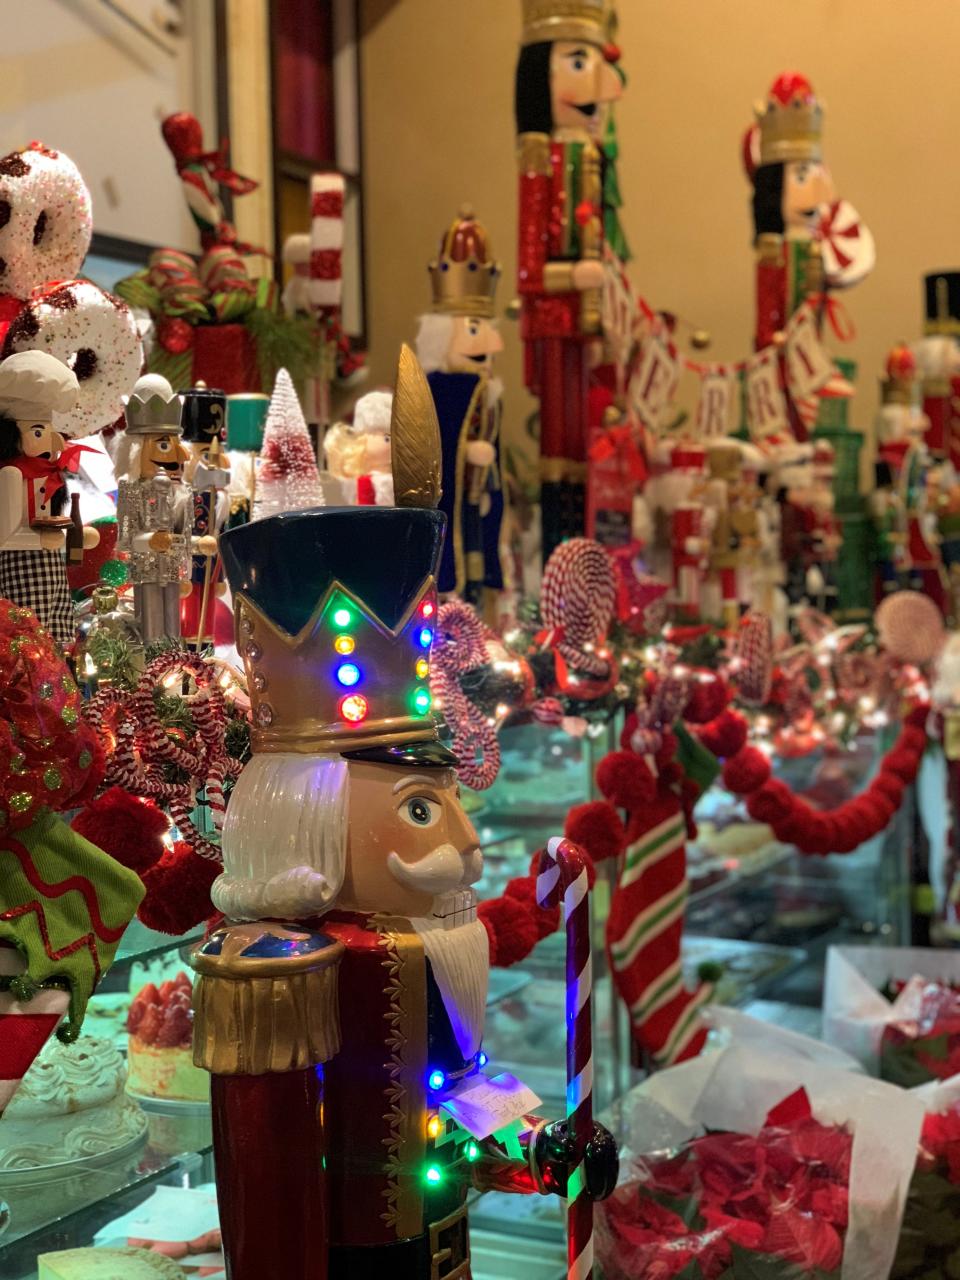 The huge nutcracker display is the show-stopper at the Candlewyck Diner.